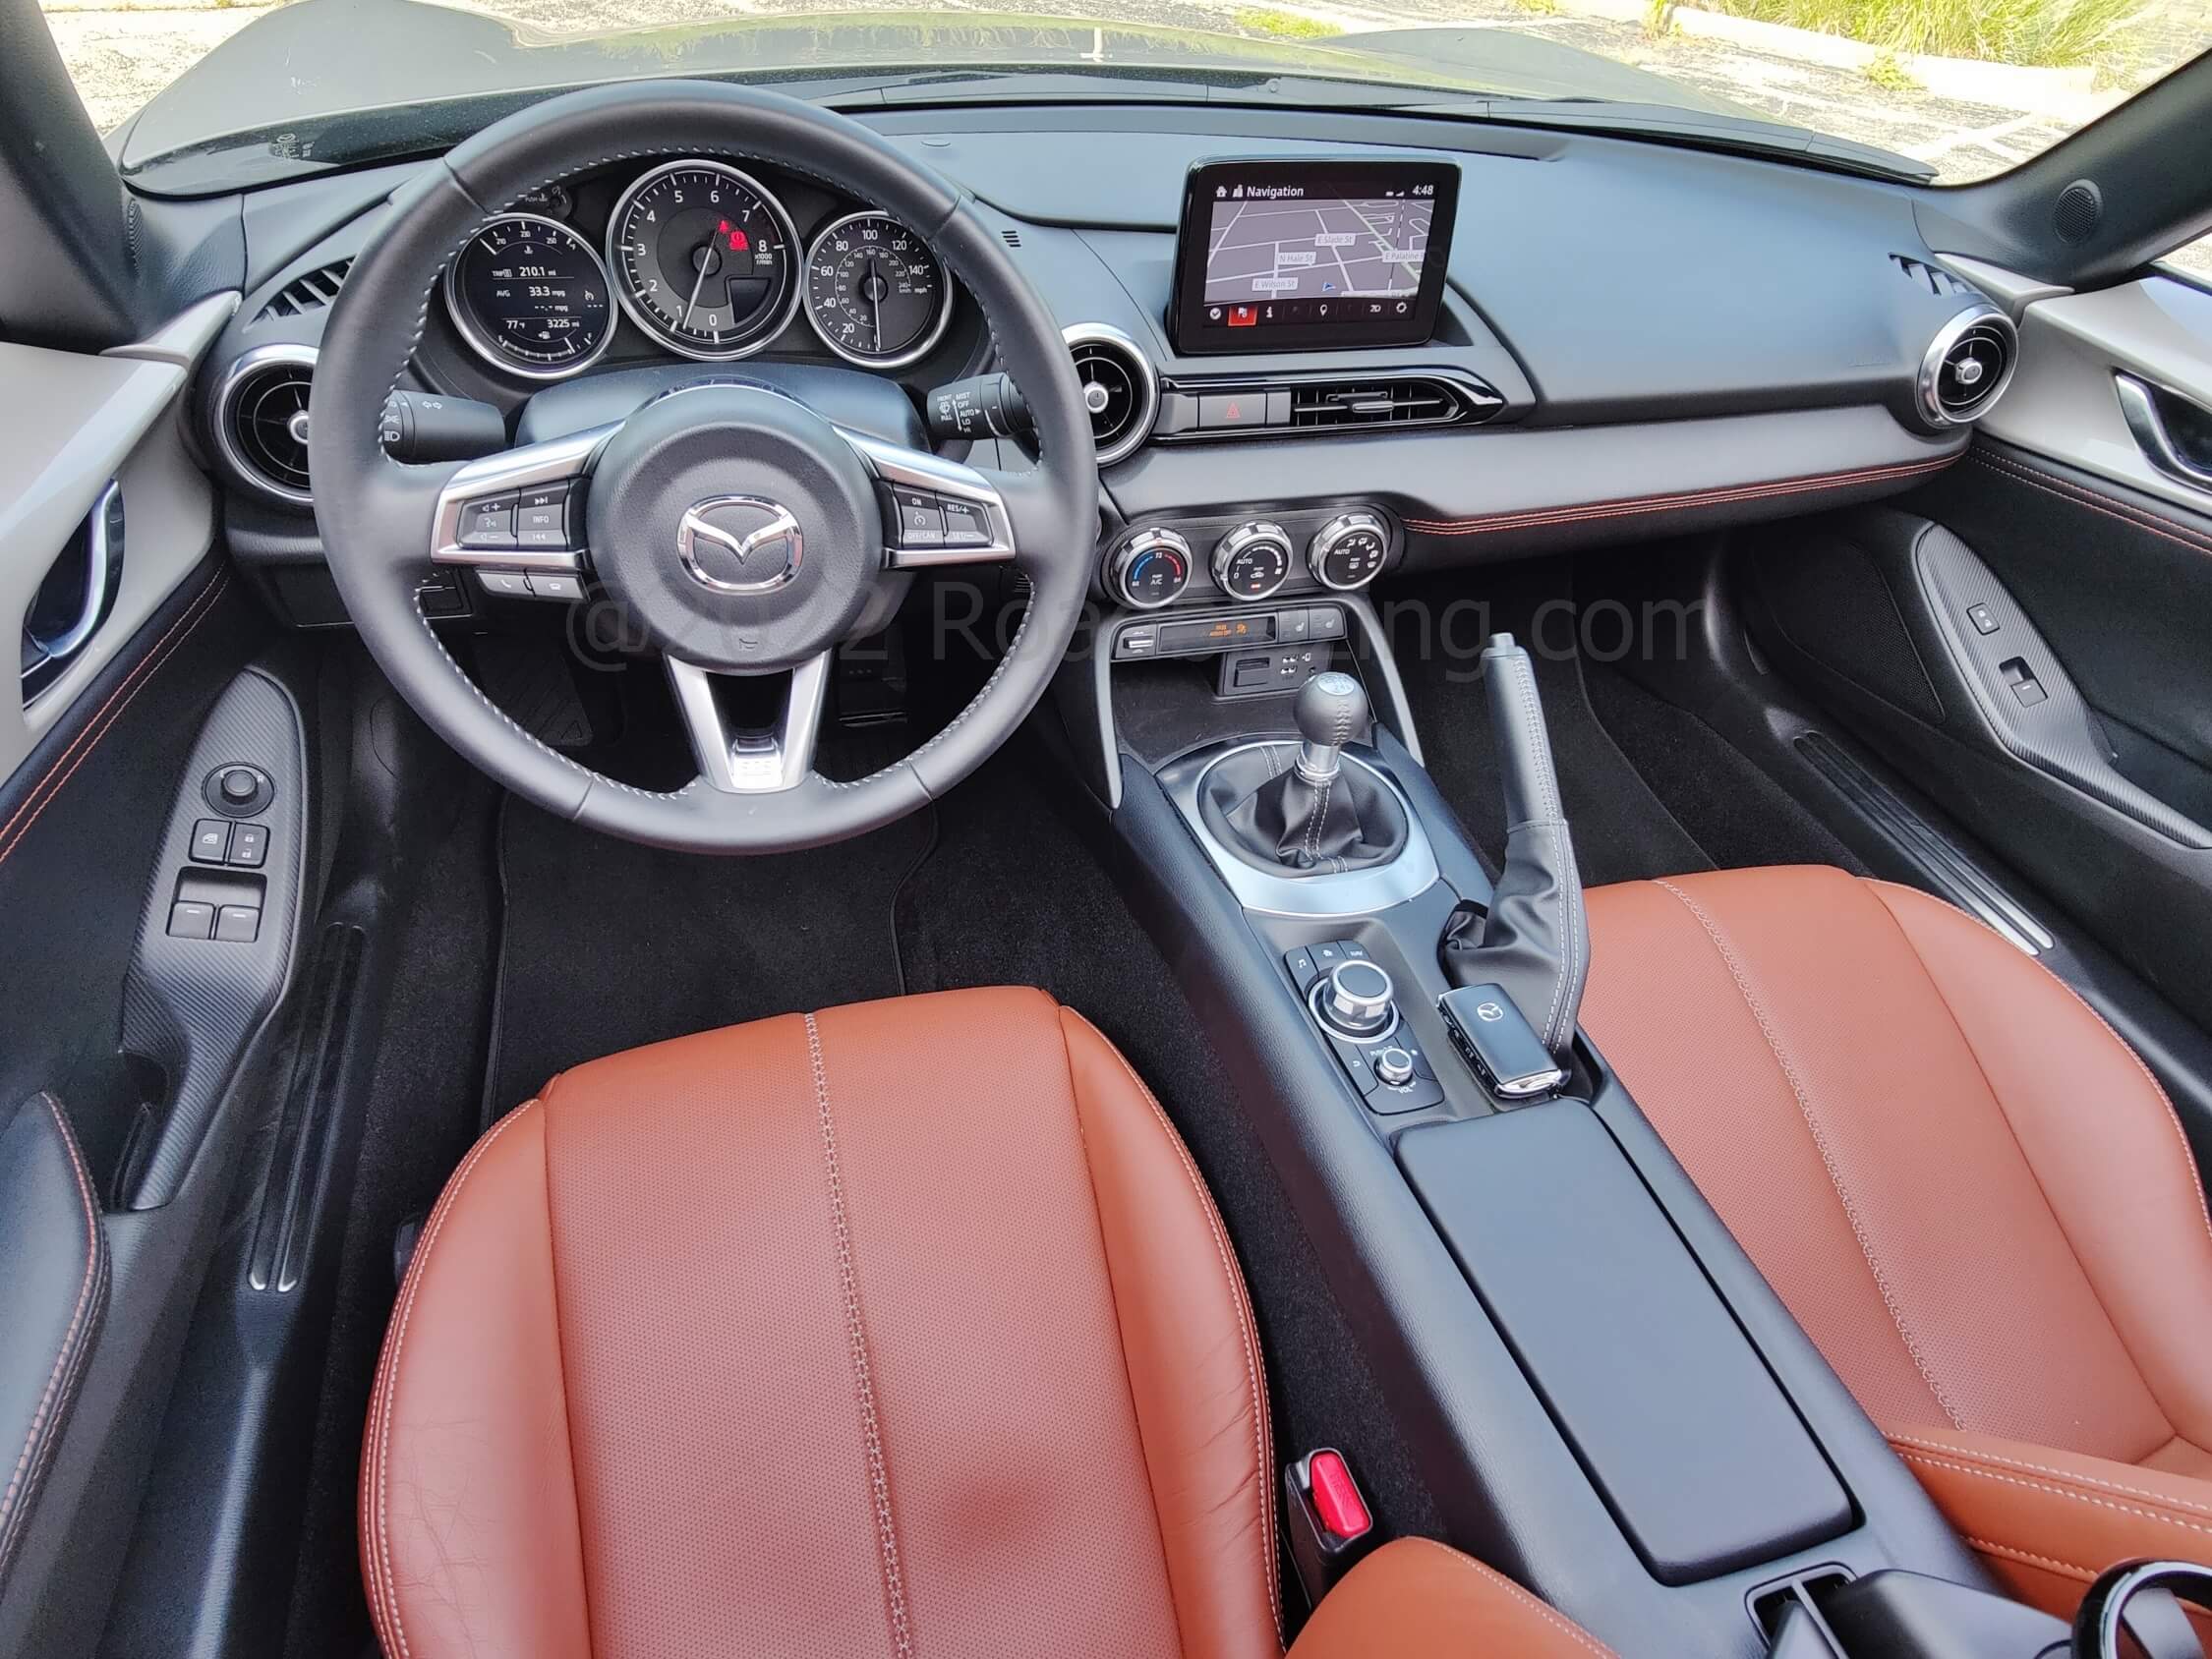 2022 Mazda MX-5 Miata RF: Think classic 1960's British roadster with modern accoutrements for that Jinb Ittai "Rider with Steed" experience.